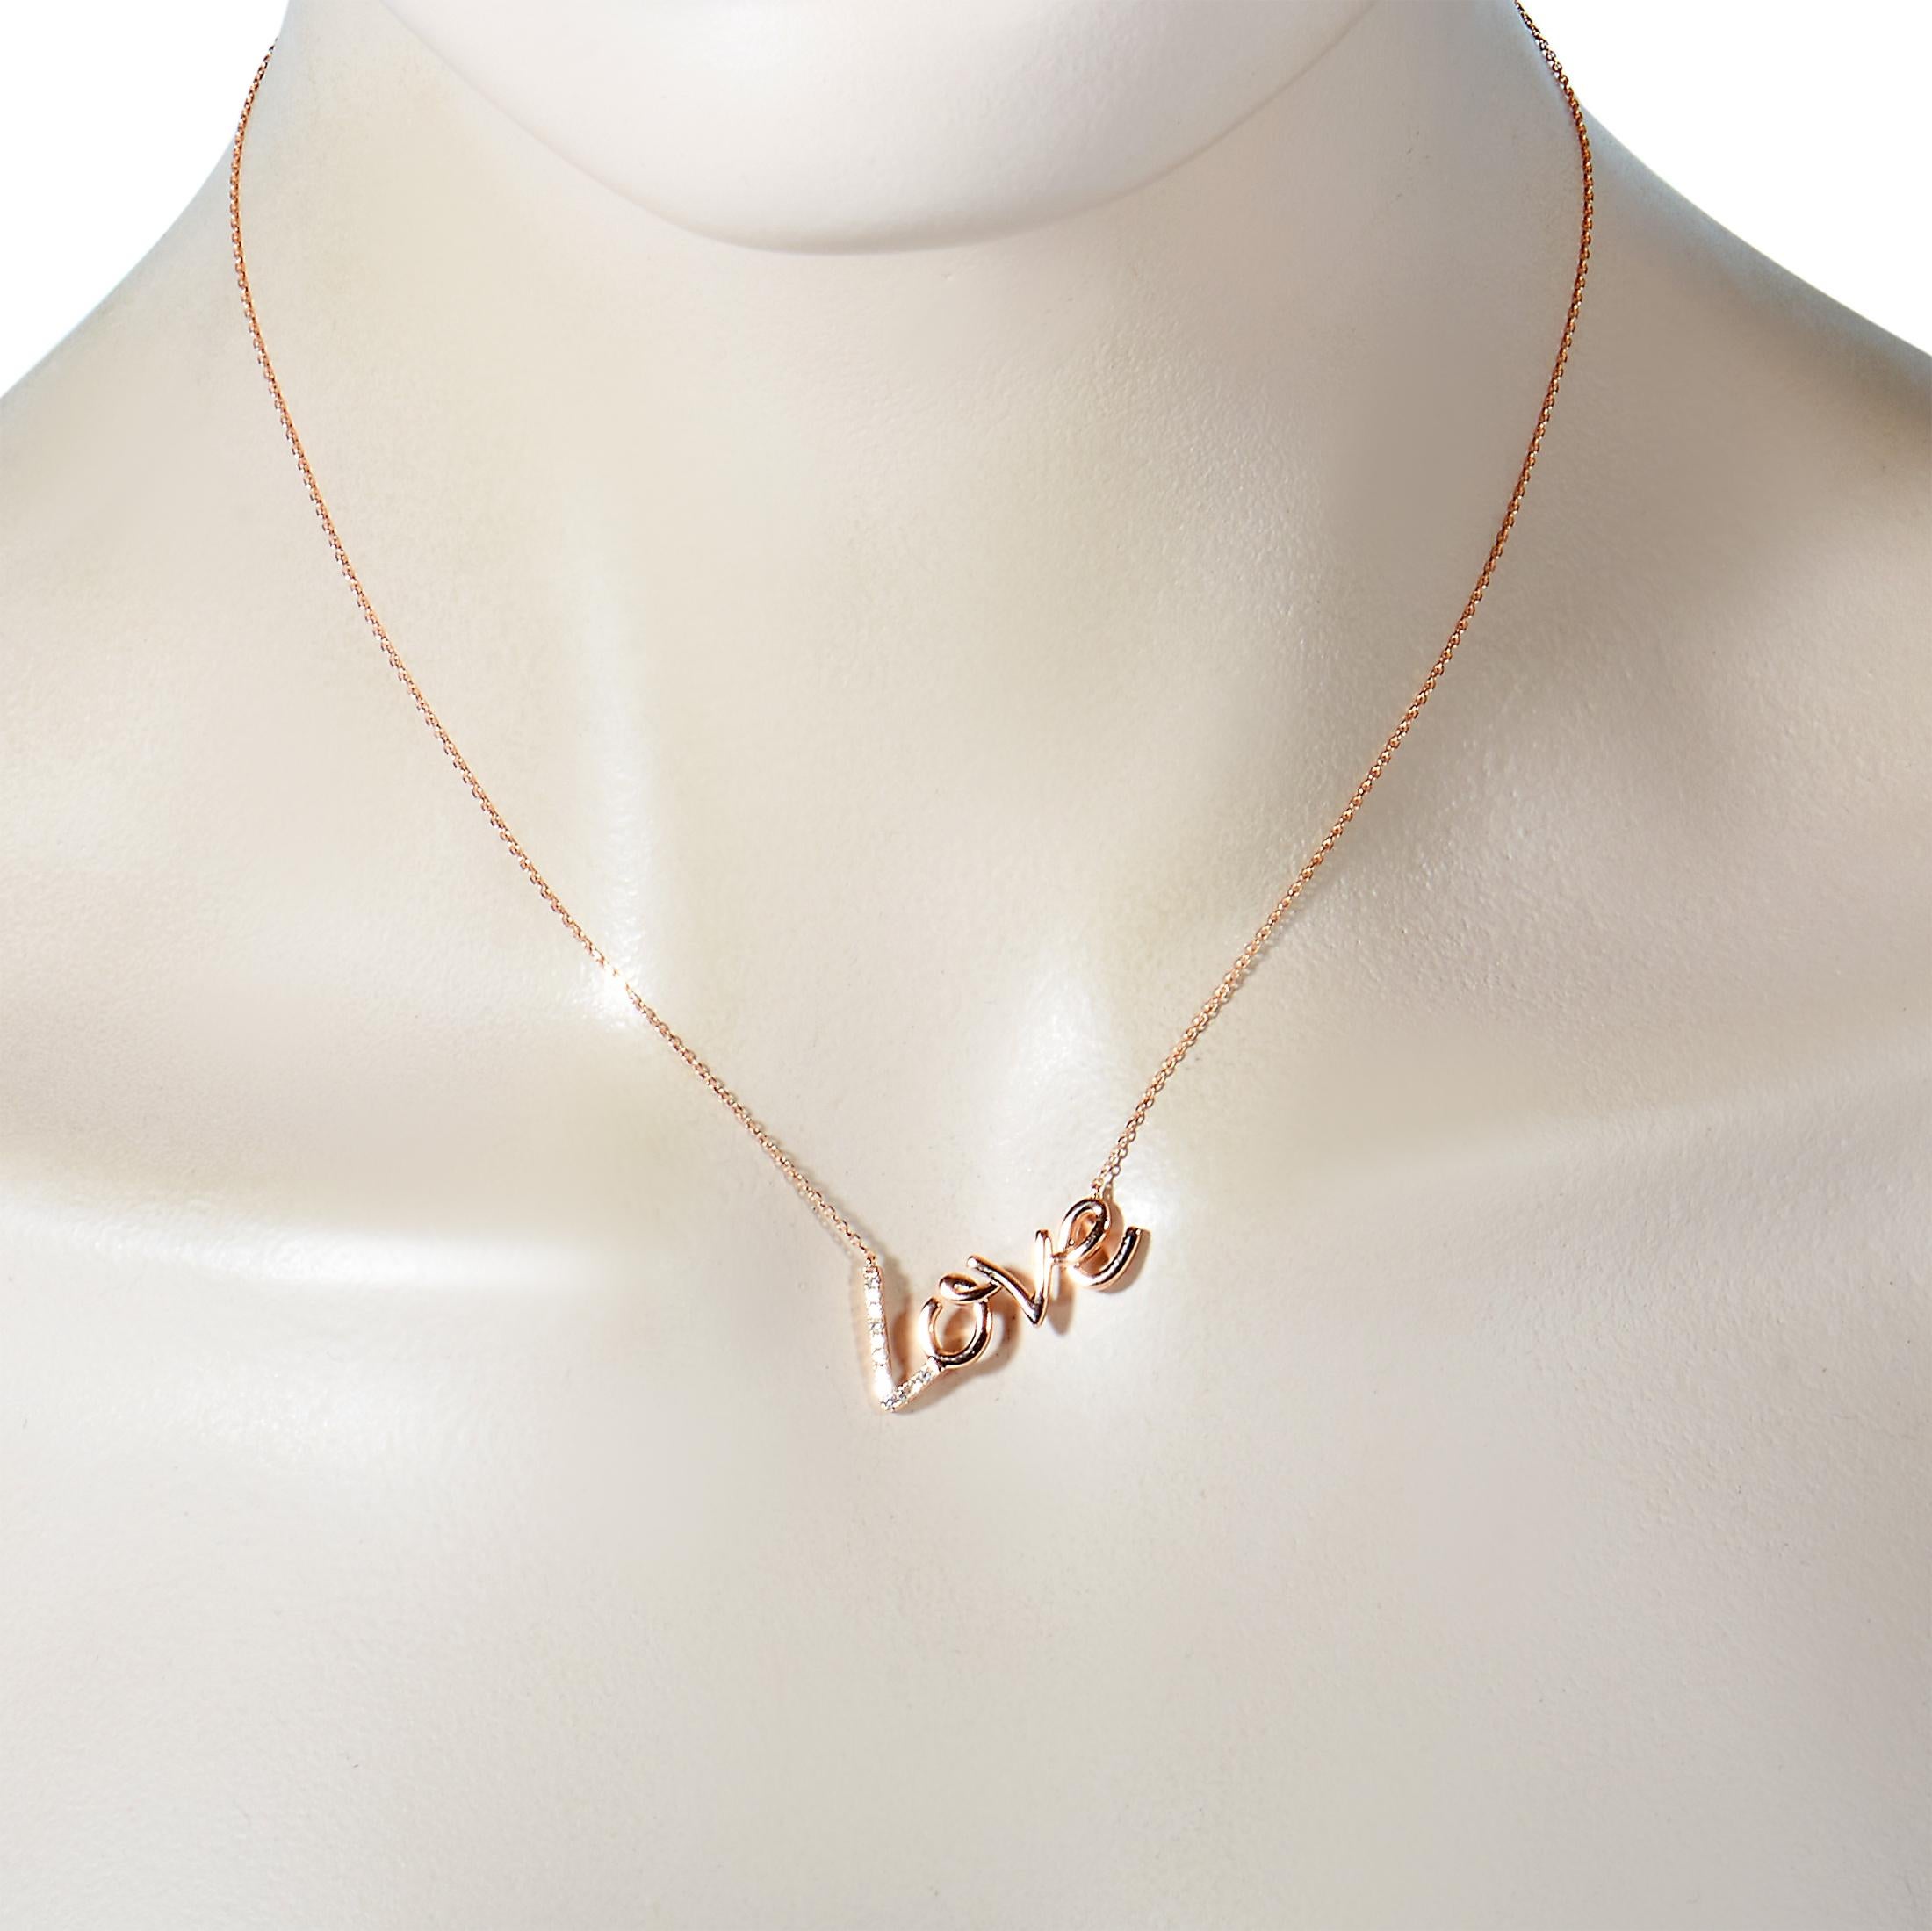 This LB Exclusive necklace is made of 14K rose gold and embellished with diamonds that amount to 0.10 carats. The necklace weighs 3.1 grams and boasts a 14” chain and a “love” pendant that measures 1” in length and 0.50” in width.
 
 Offered in